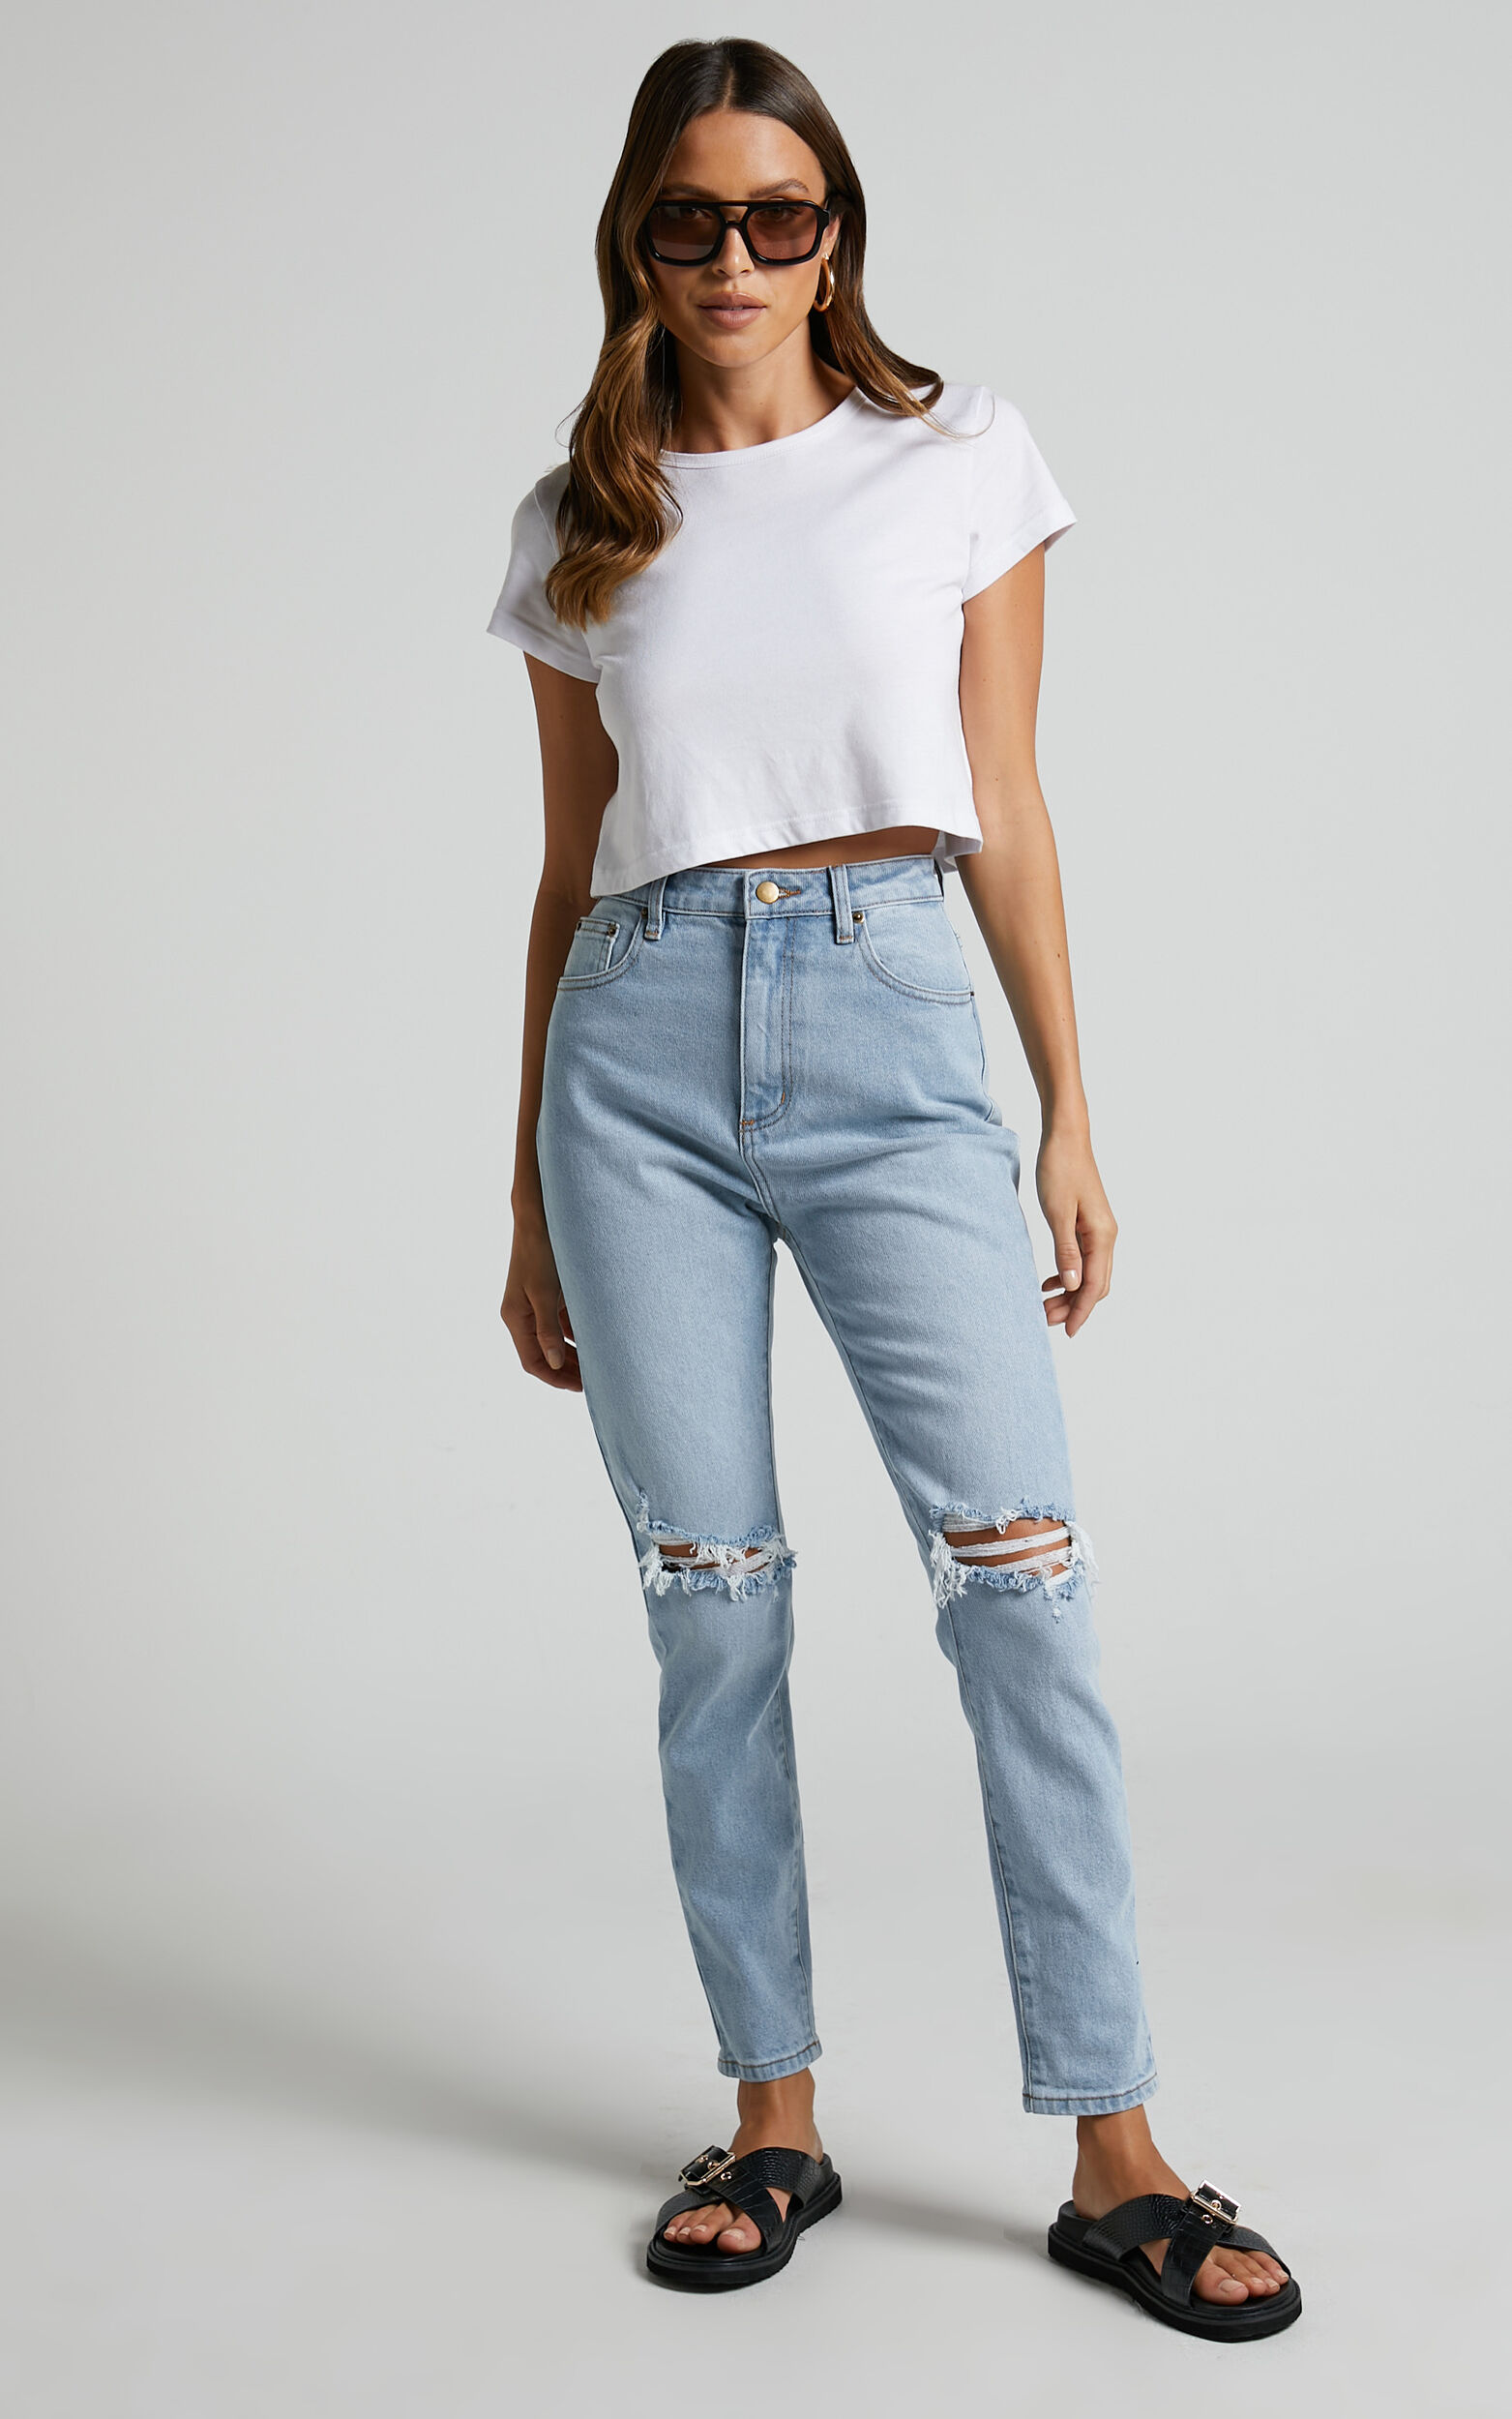 Izira Jeans - High Waisted Ripped Denim Mom Jeans in Mid Blue Wash - 04, BLU1